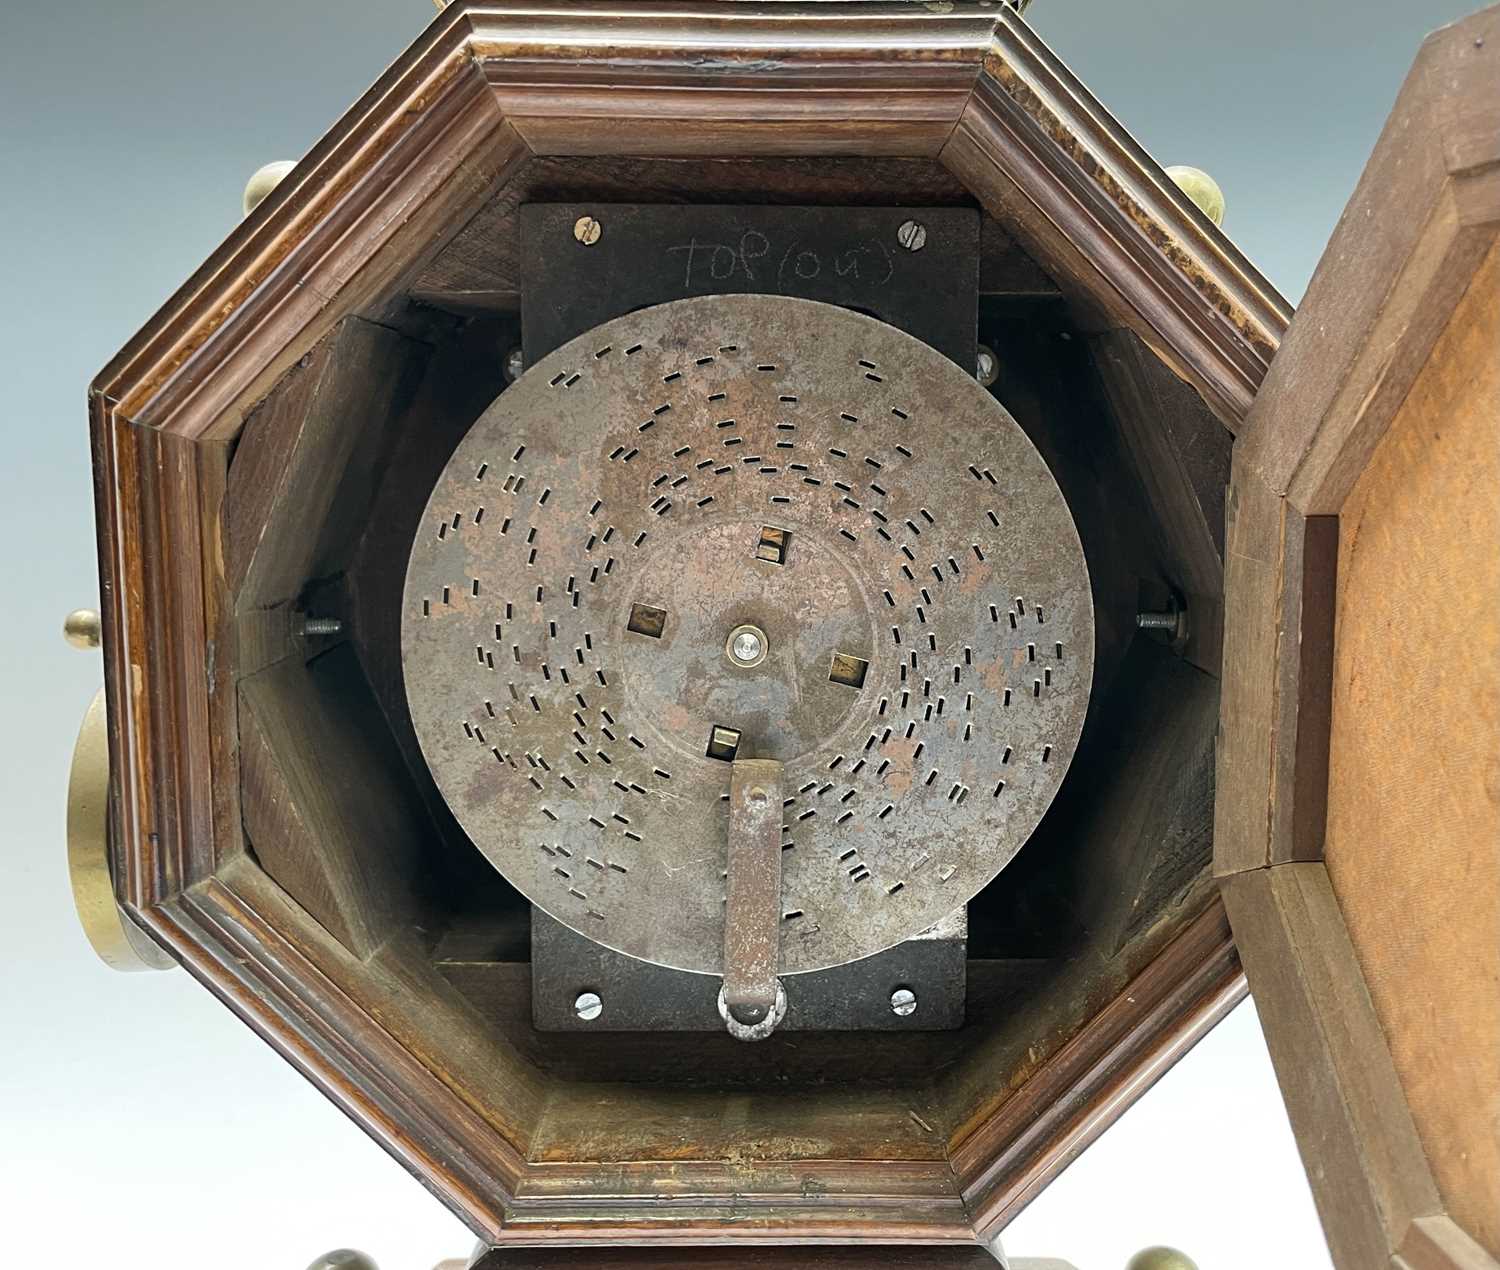 A German walnut and brass mantel clock, circa 1900, in the Aesthetic taste, with octagonal case - Image 6 of 11